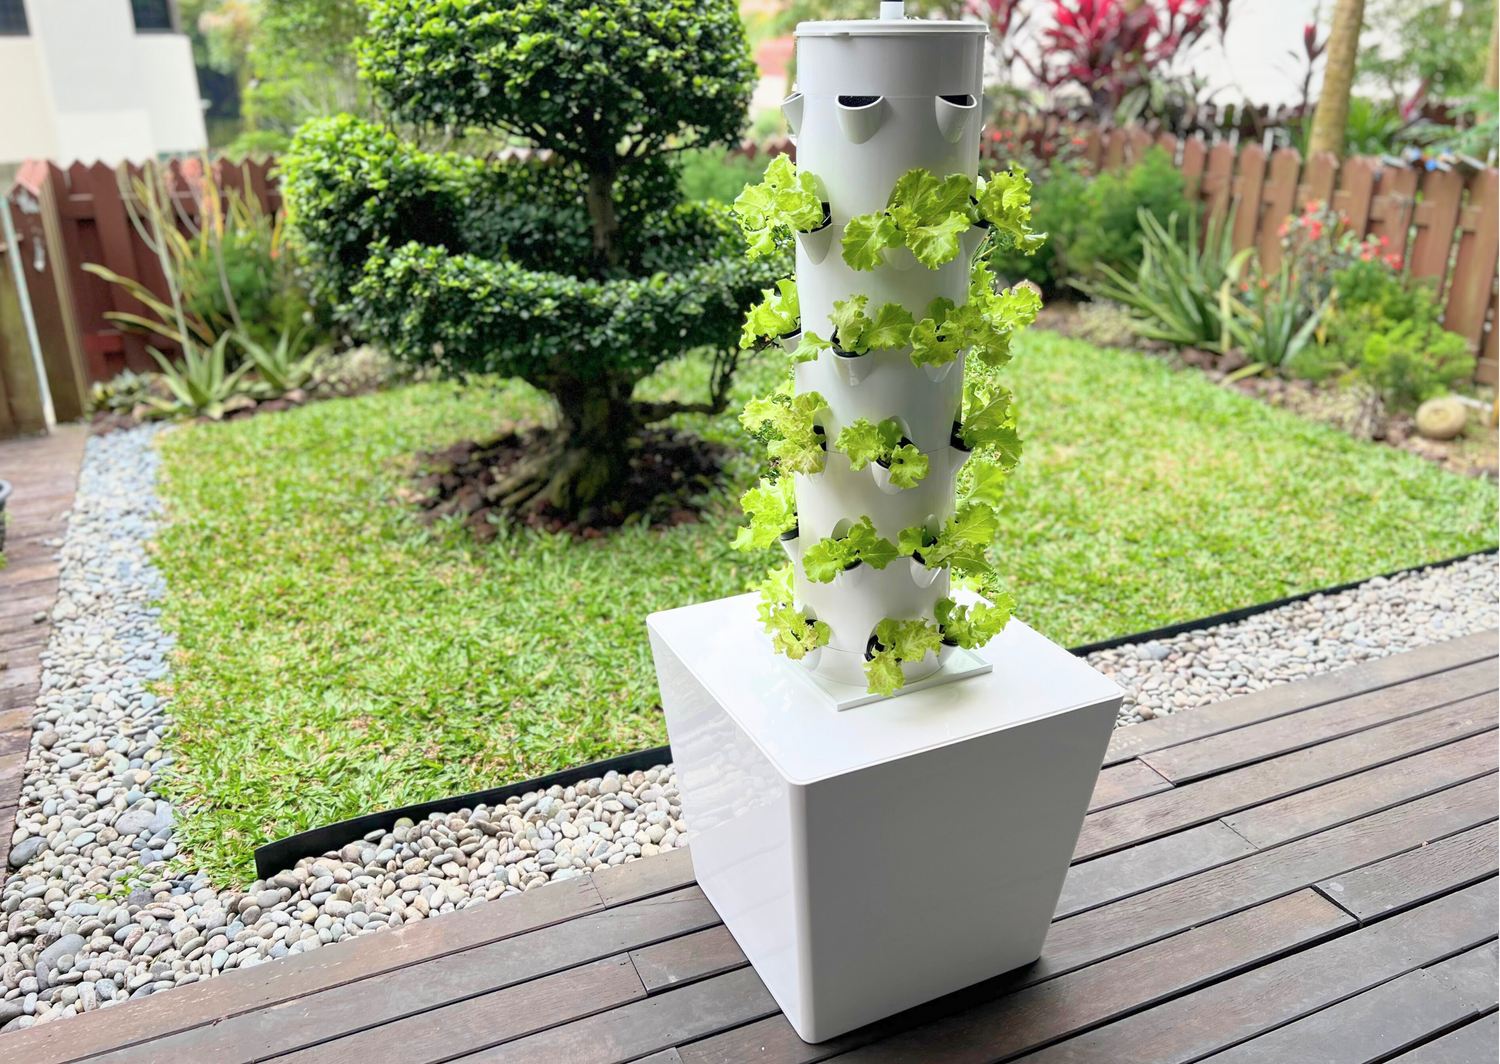 Let us work together to create a sustainable farming culture. This image shows V-Gro One hydroponics growing system for home use.